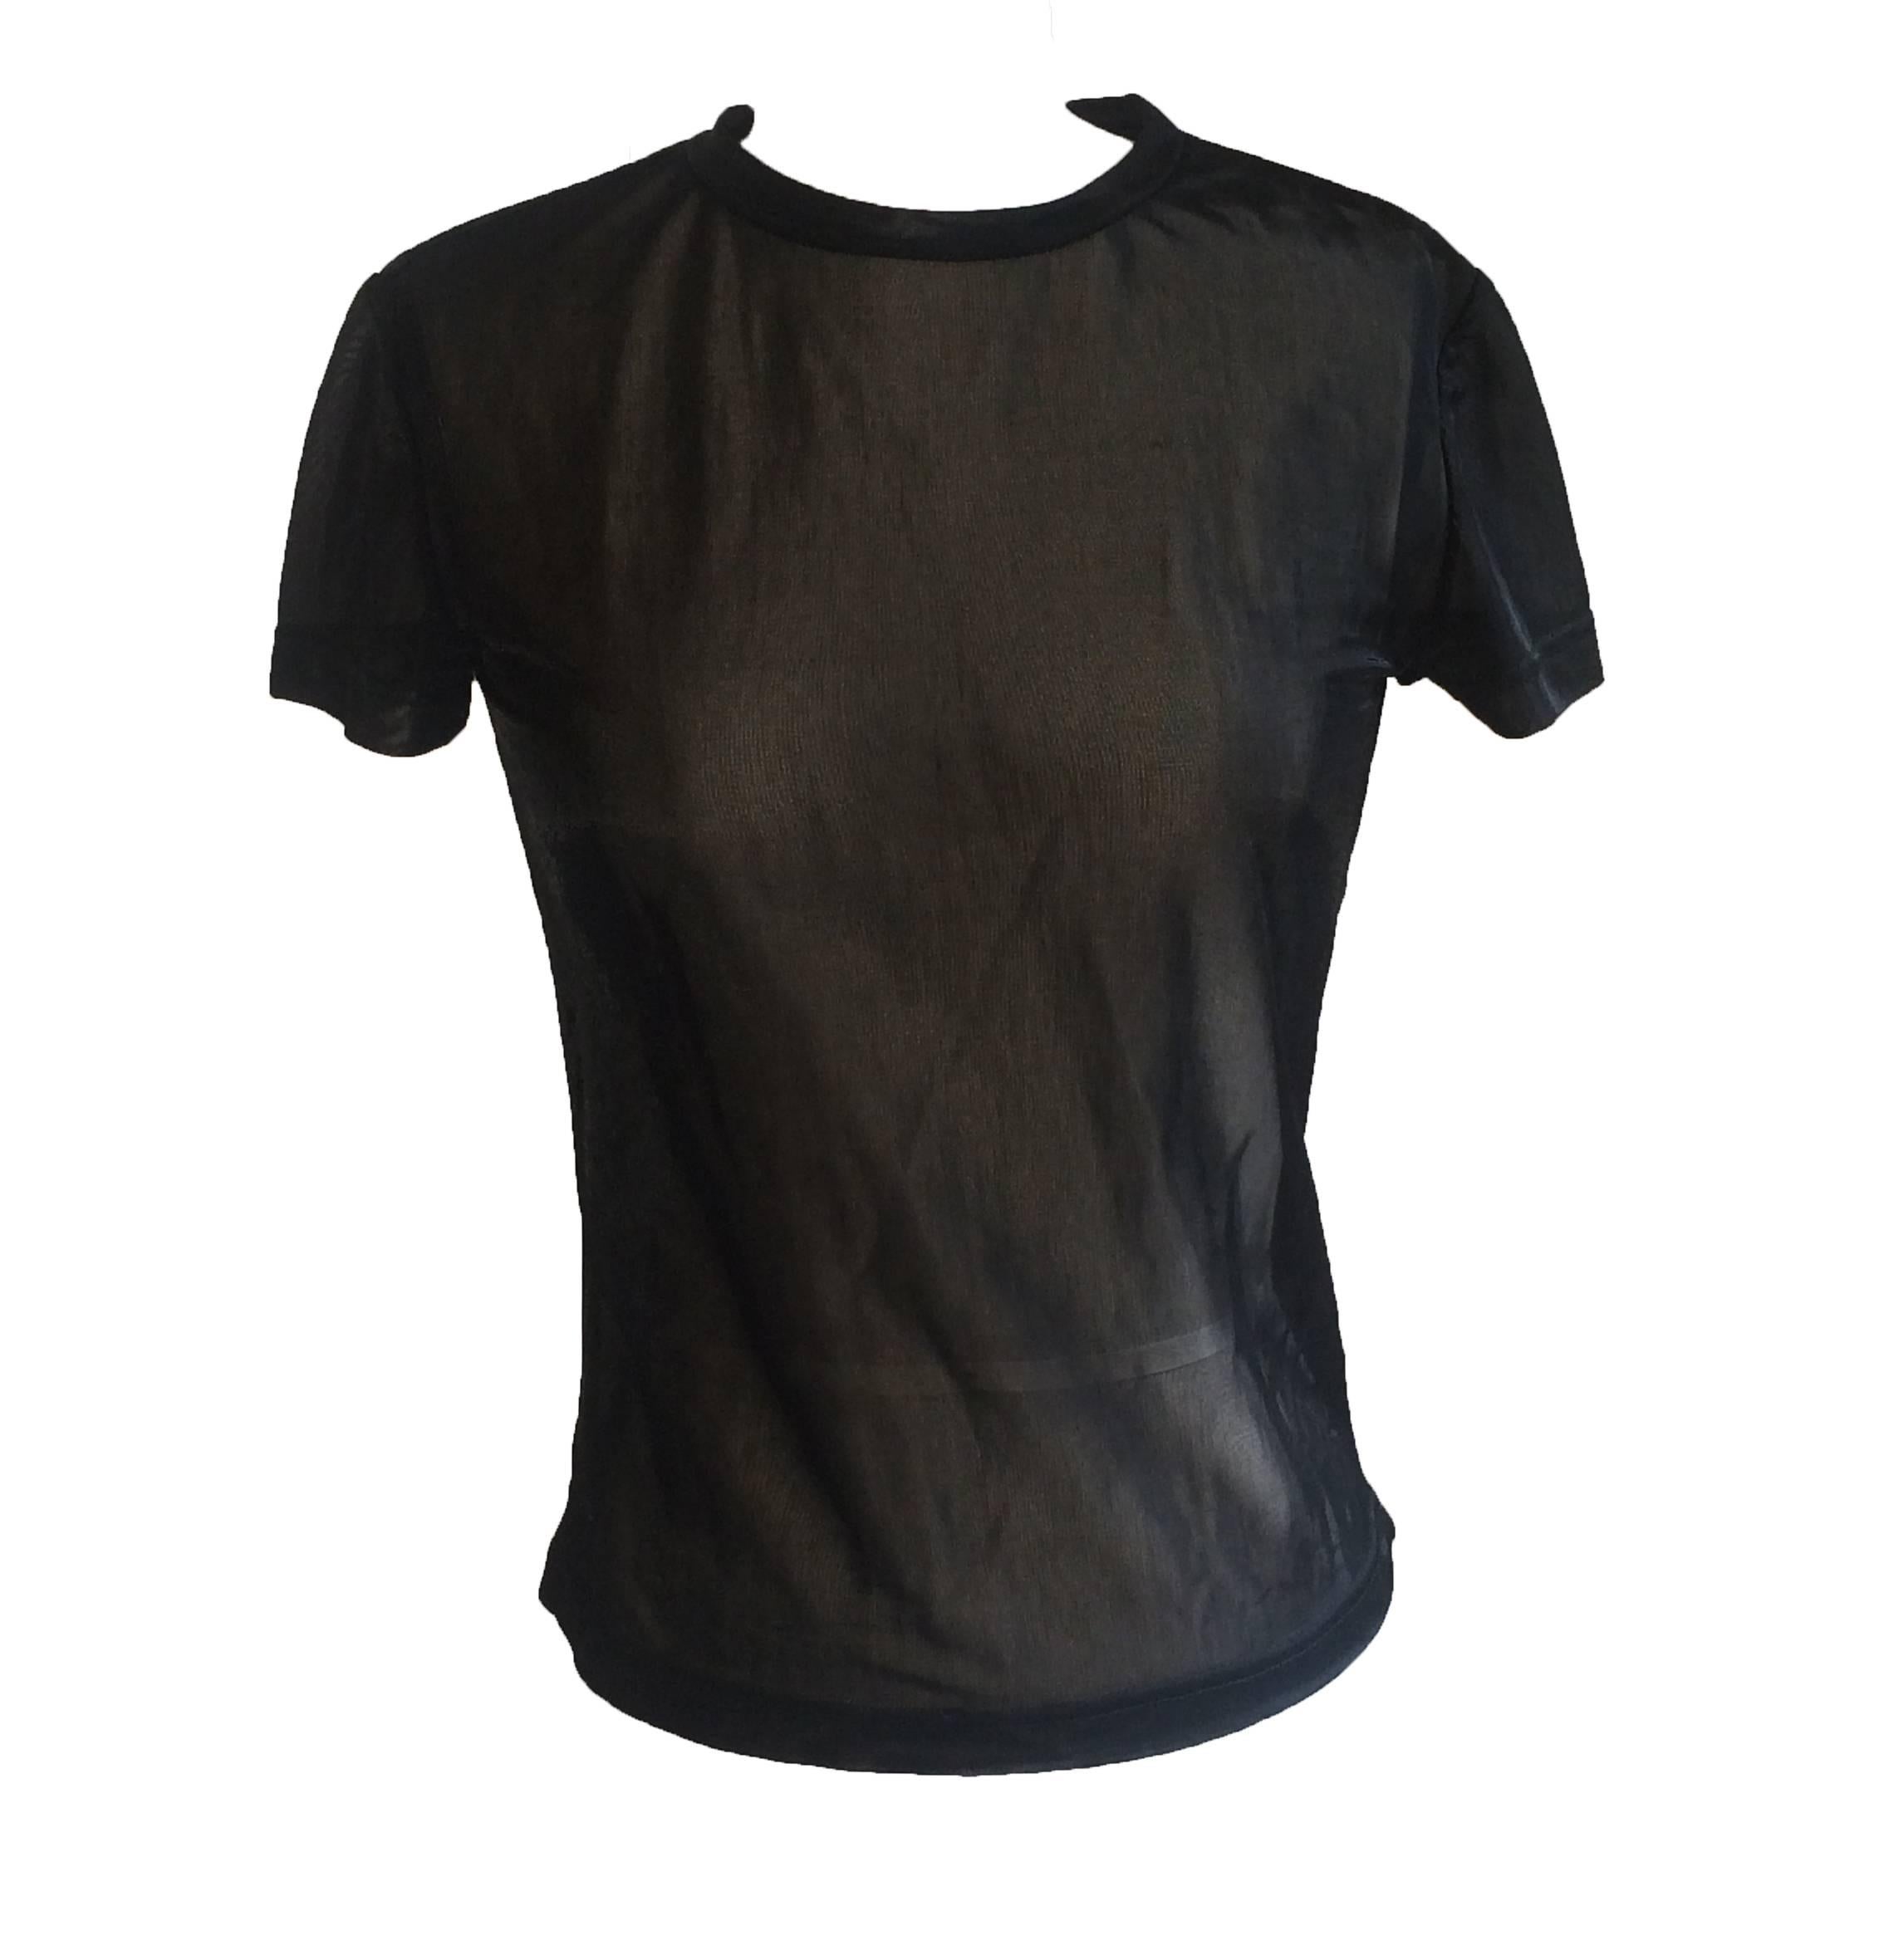 Alexander McQueen rare & iconic 'McQueen 00' black mesh t-shirt with metallic silver embroidery at back from the 2000 collection. Sheer, glossy, fine-knit mesh.

Made in Italy.

Size label removed, fits like XS/S.
Bust 32".
Waist